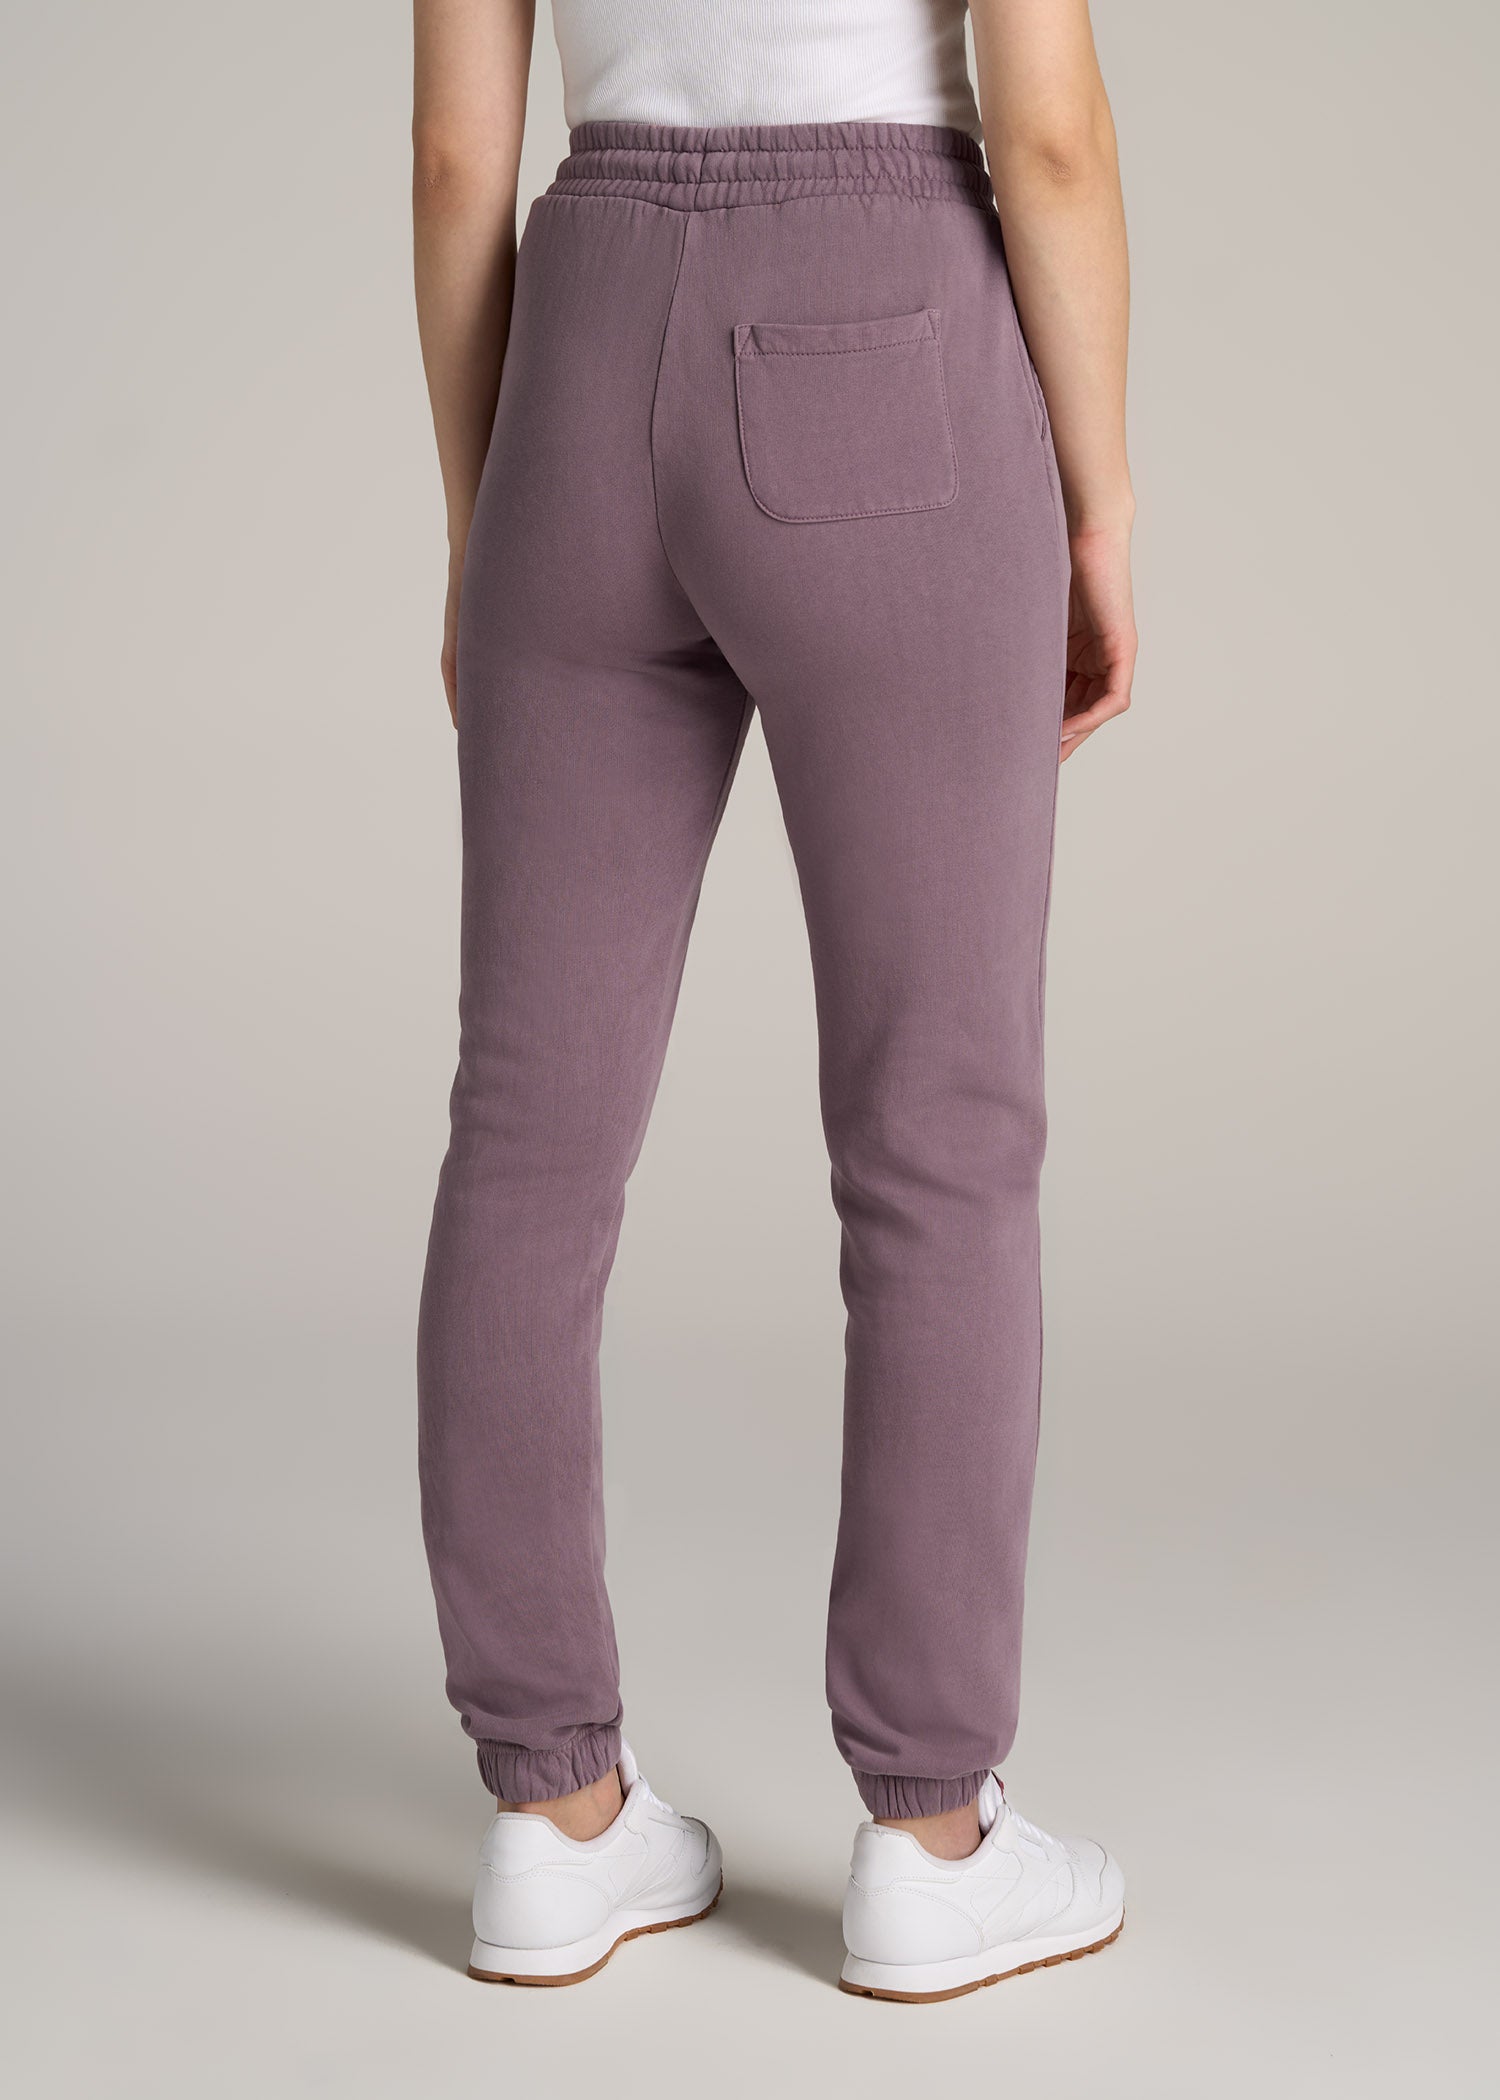 Women's Tall Wearever High-Waisted Garment-Dyed Sweatpants Smoked